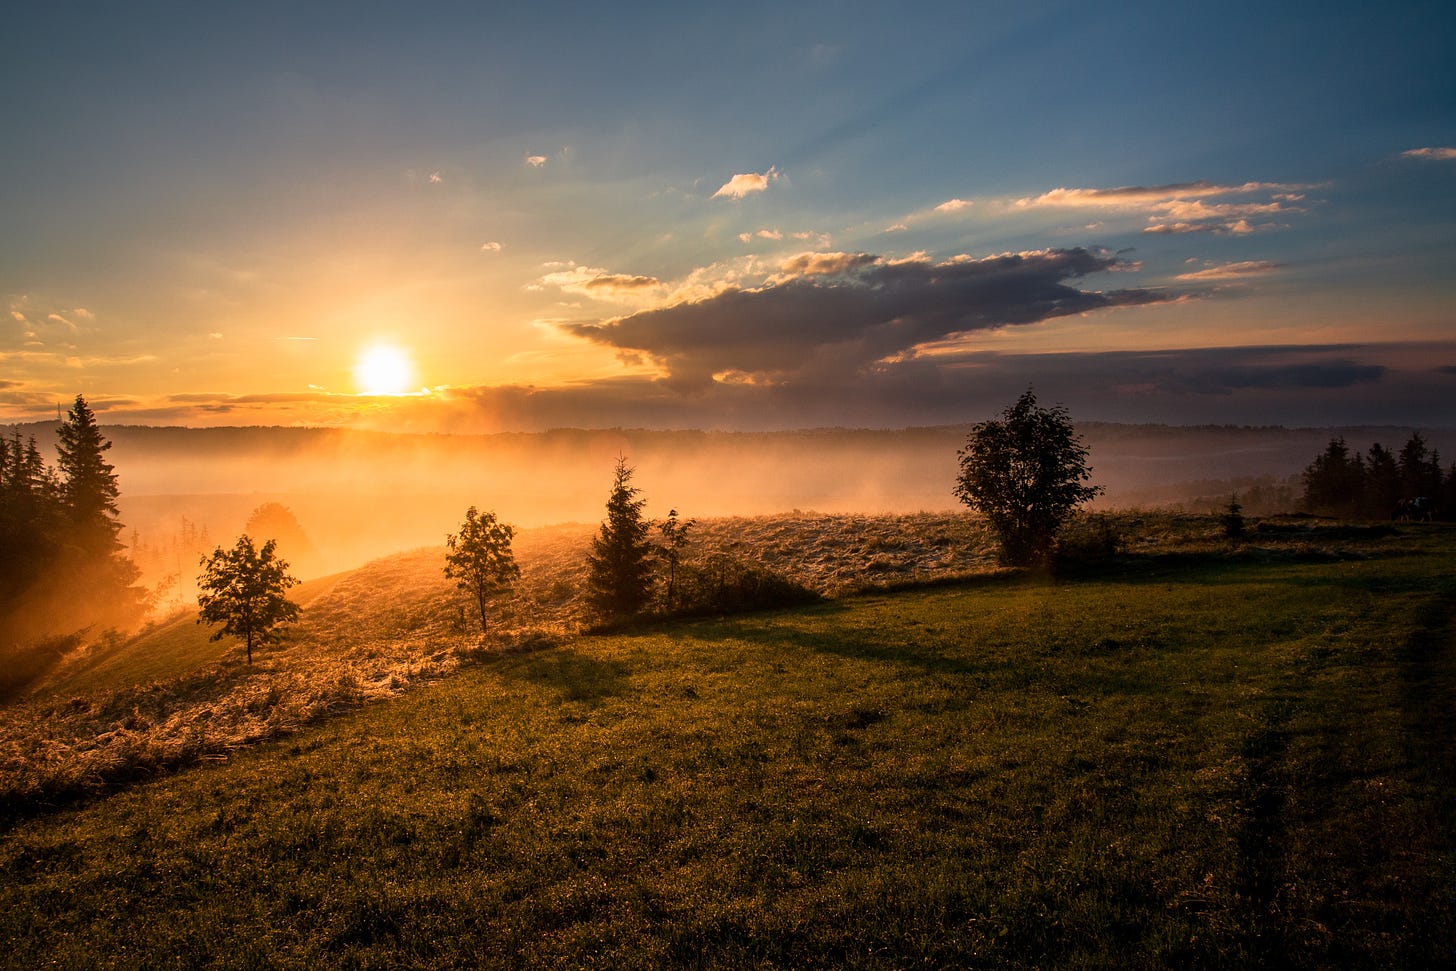 The sun rises to the left over the clouds and hills, casting a yellow haze over grass, shrubs, and trees.